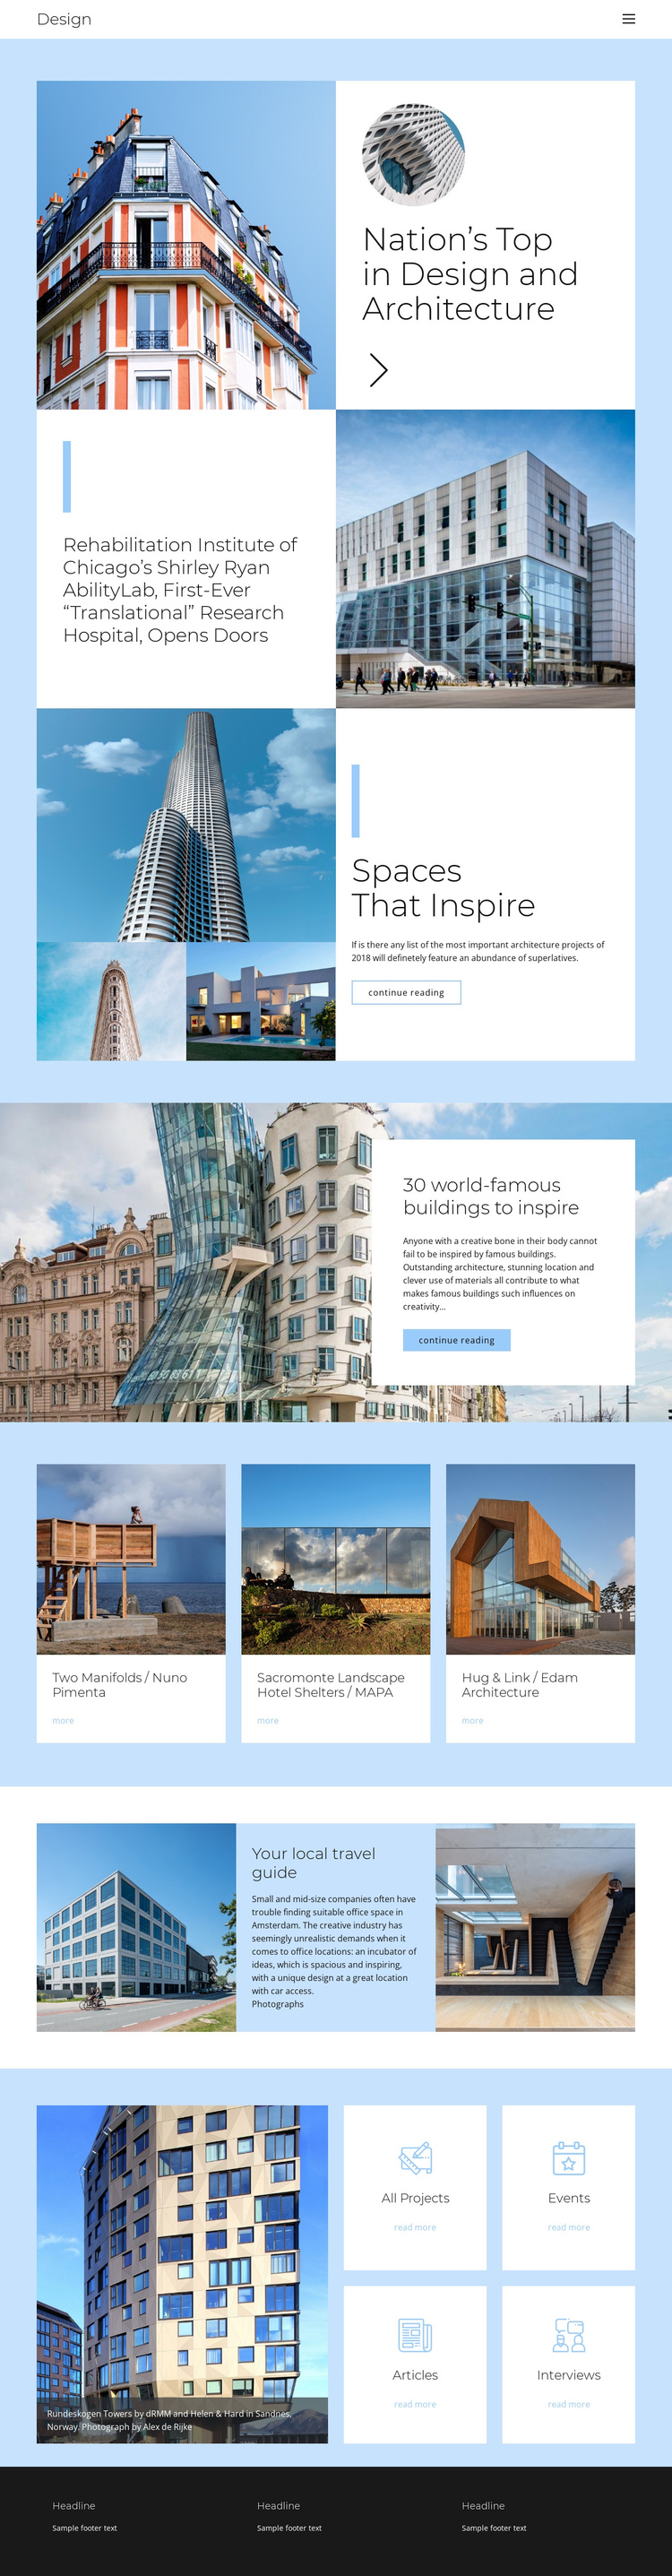 Architecture city guide Website Builder Software